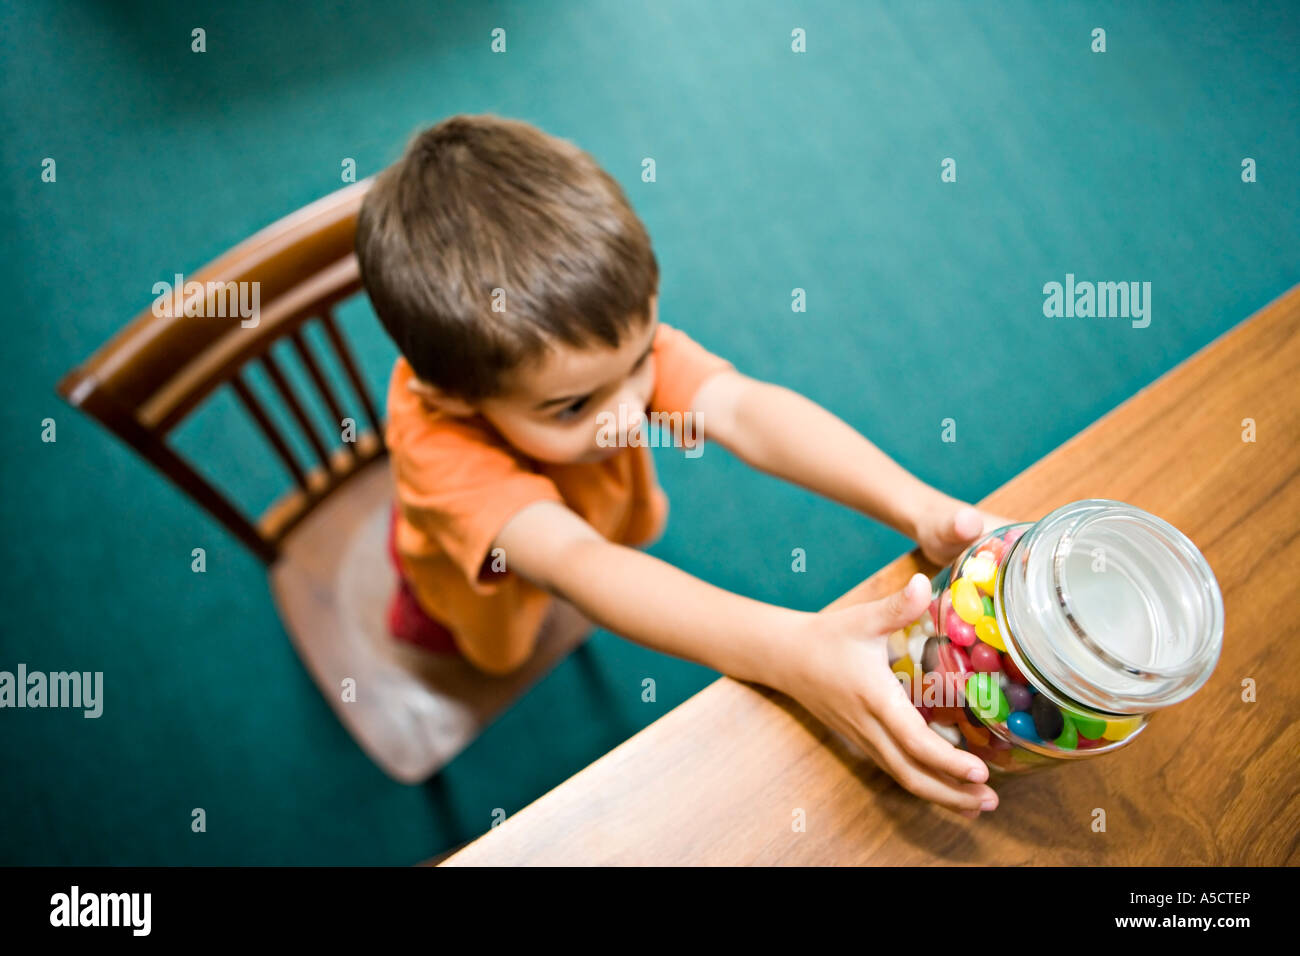 Looking down on boy reaching for sweet jar Stock Photo